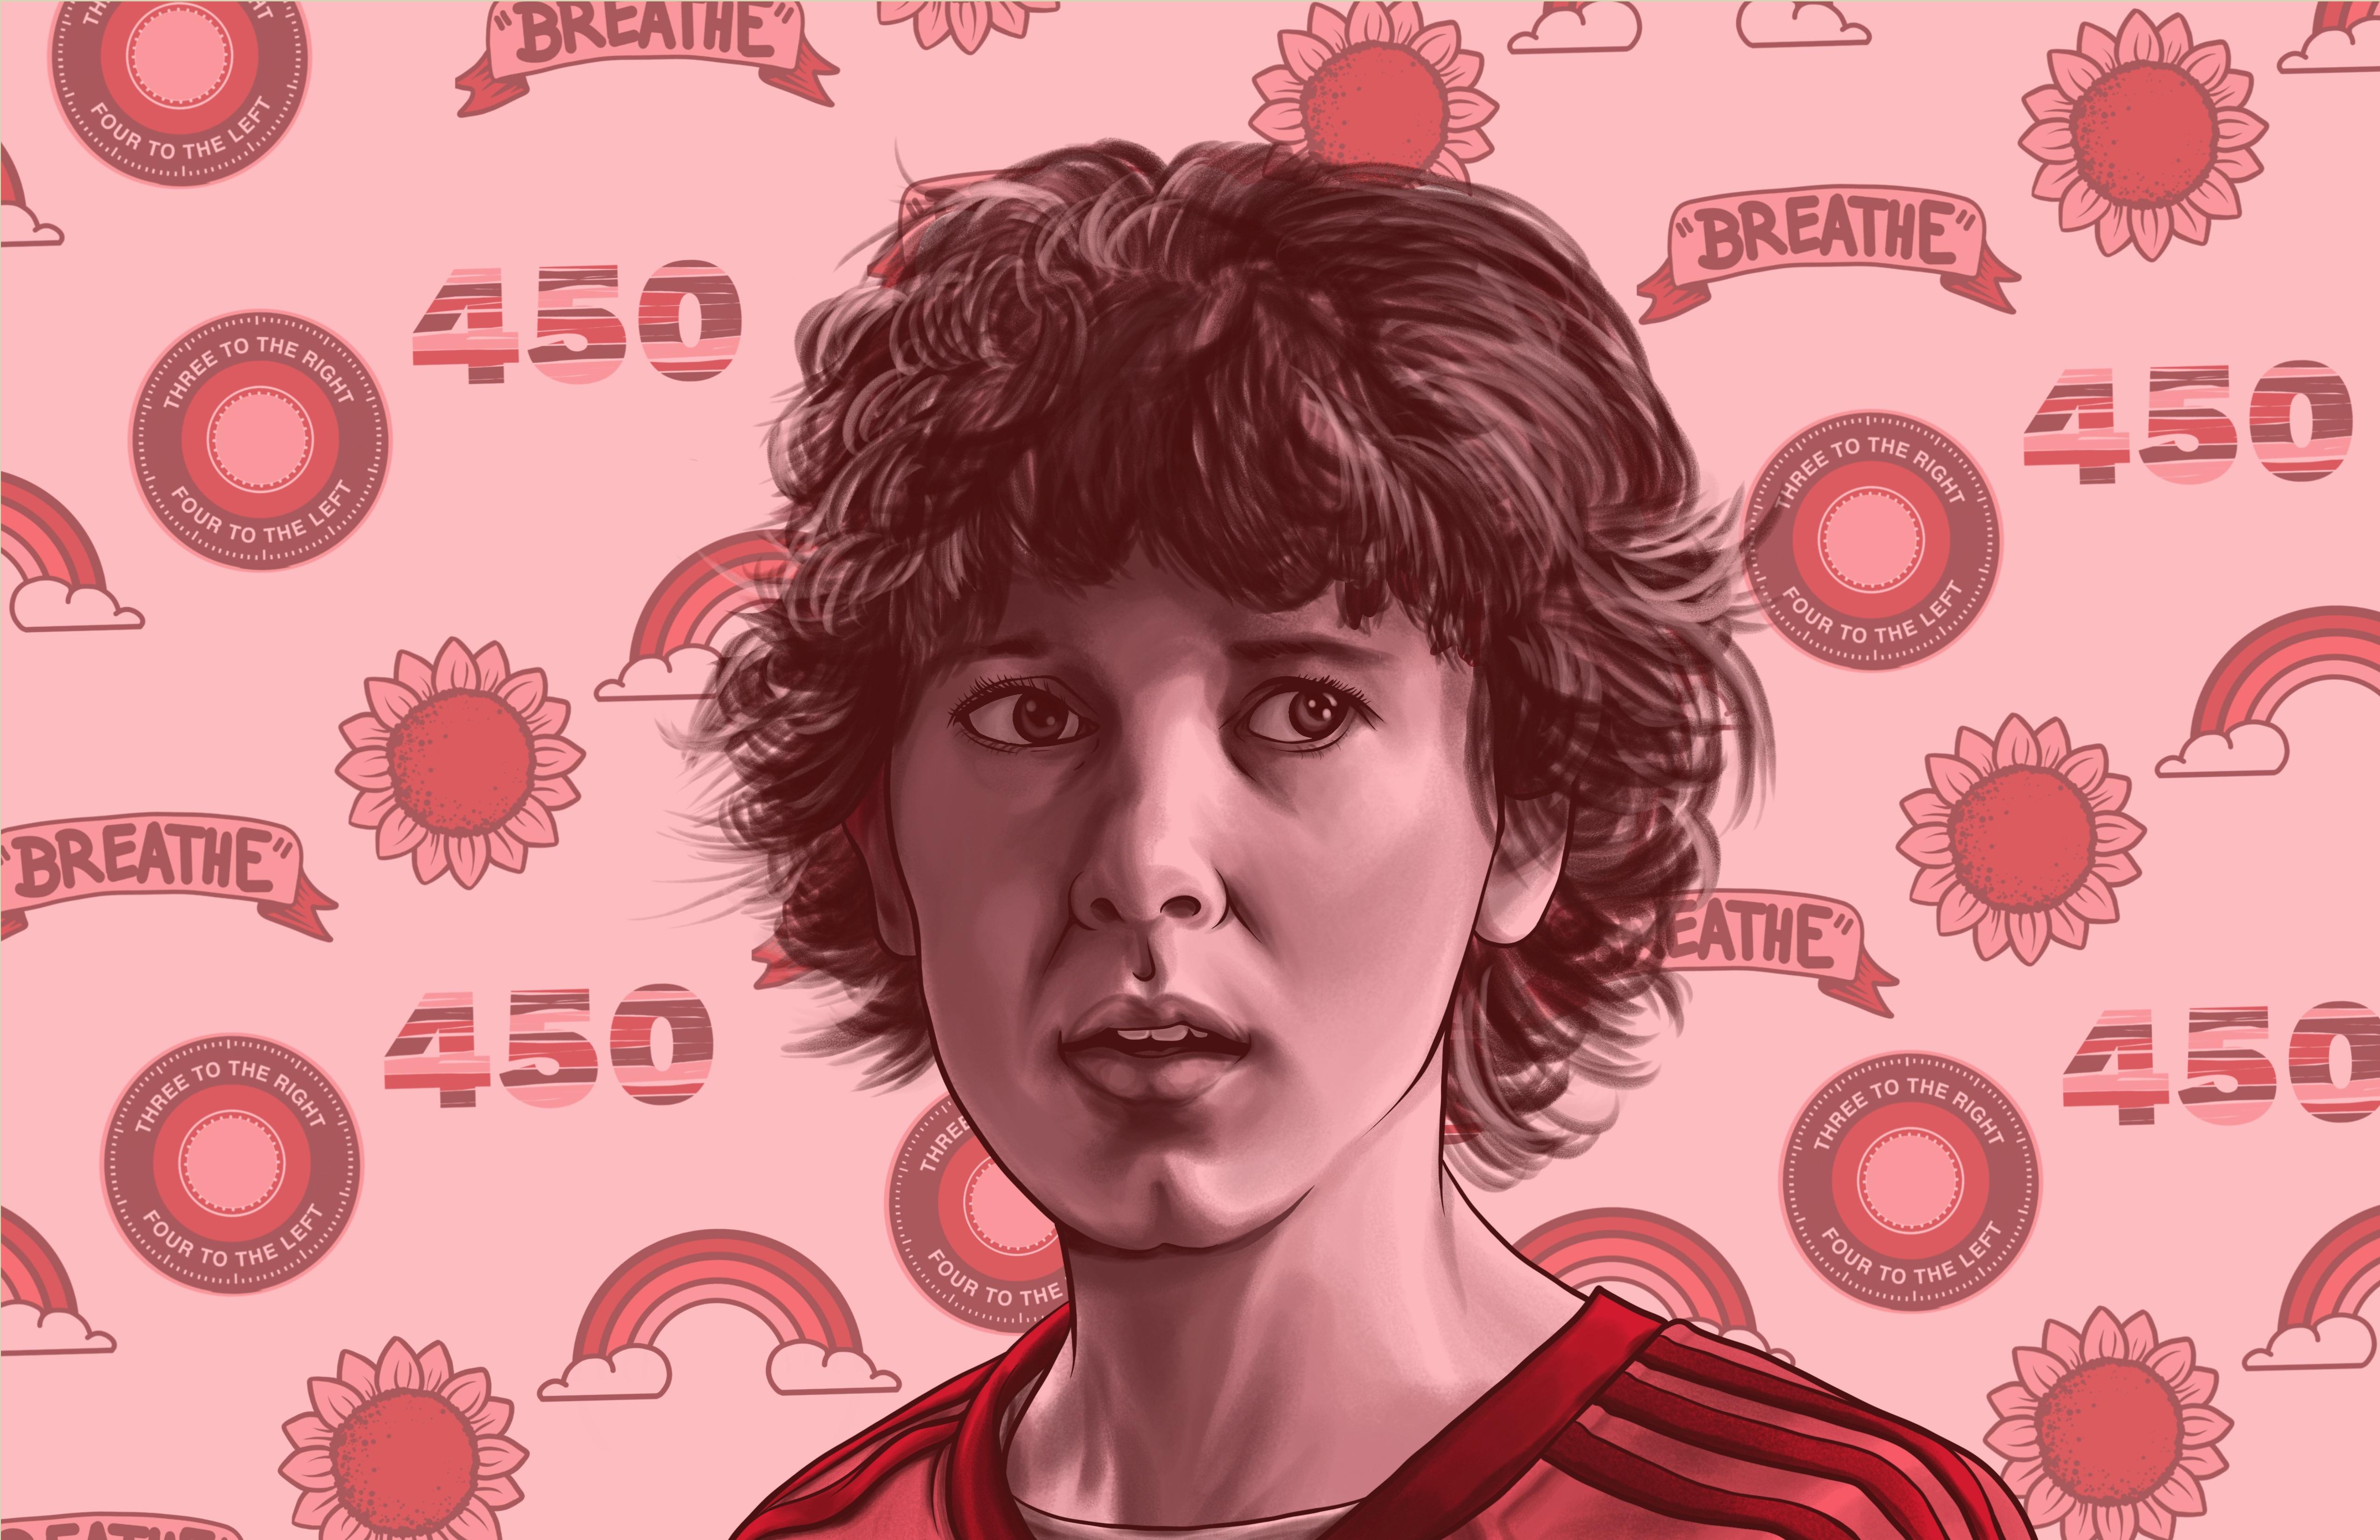 Stranger Things Back to the 80s Trivial Pursuit by Danielle Sharples on  Dribbble